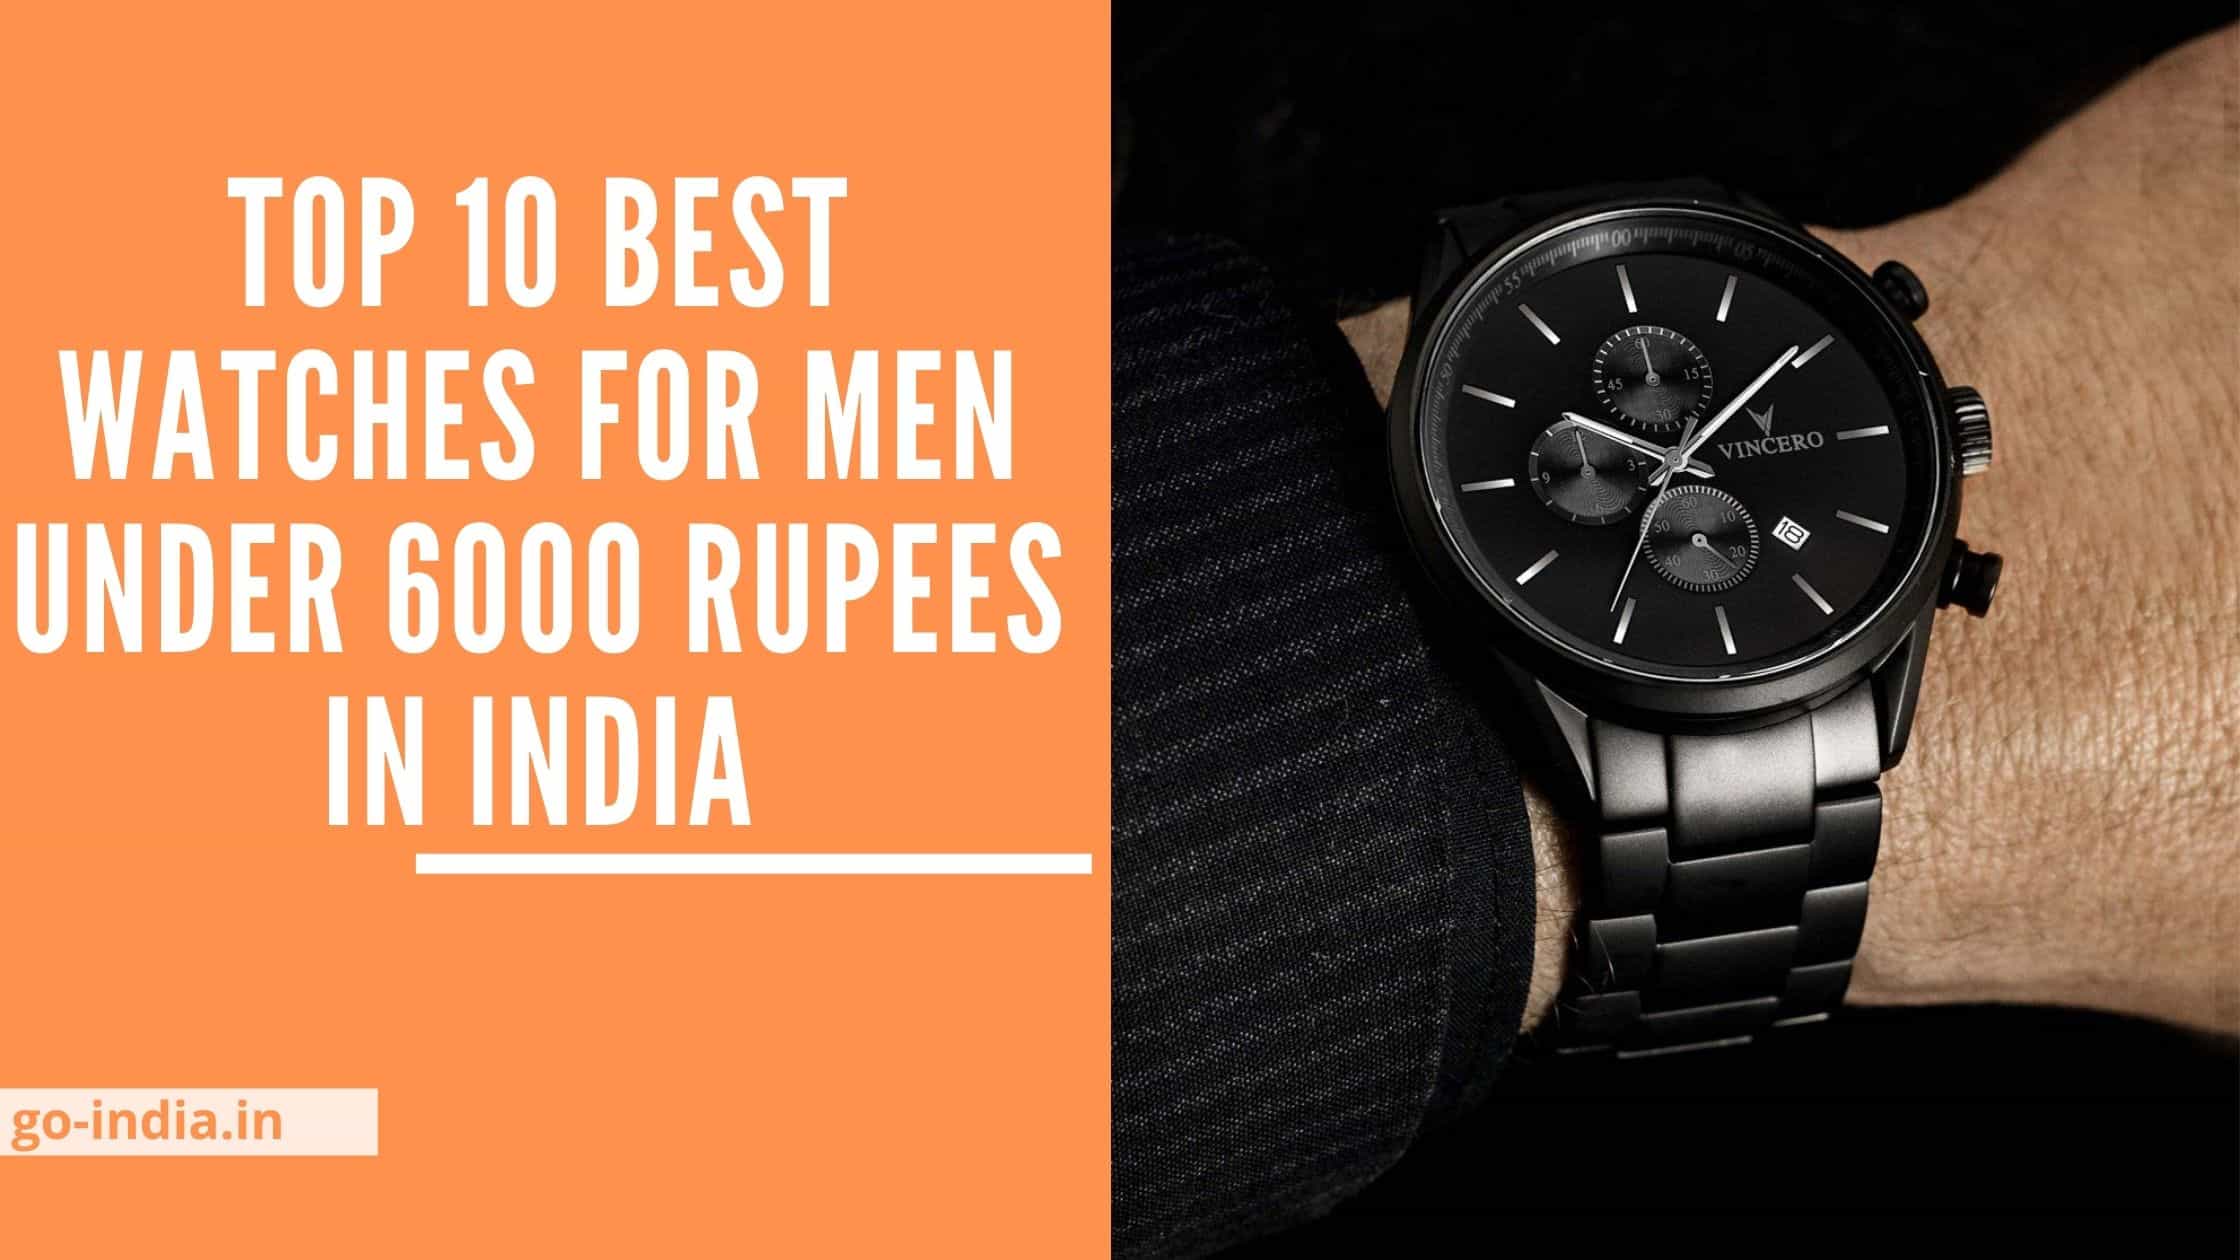 Top 10 Best Watches For Men Under 6000 Rupees in India 2022